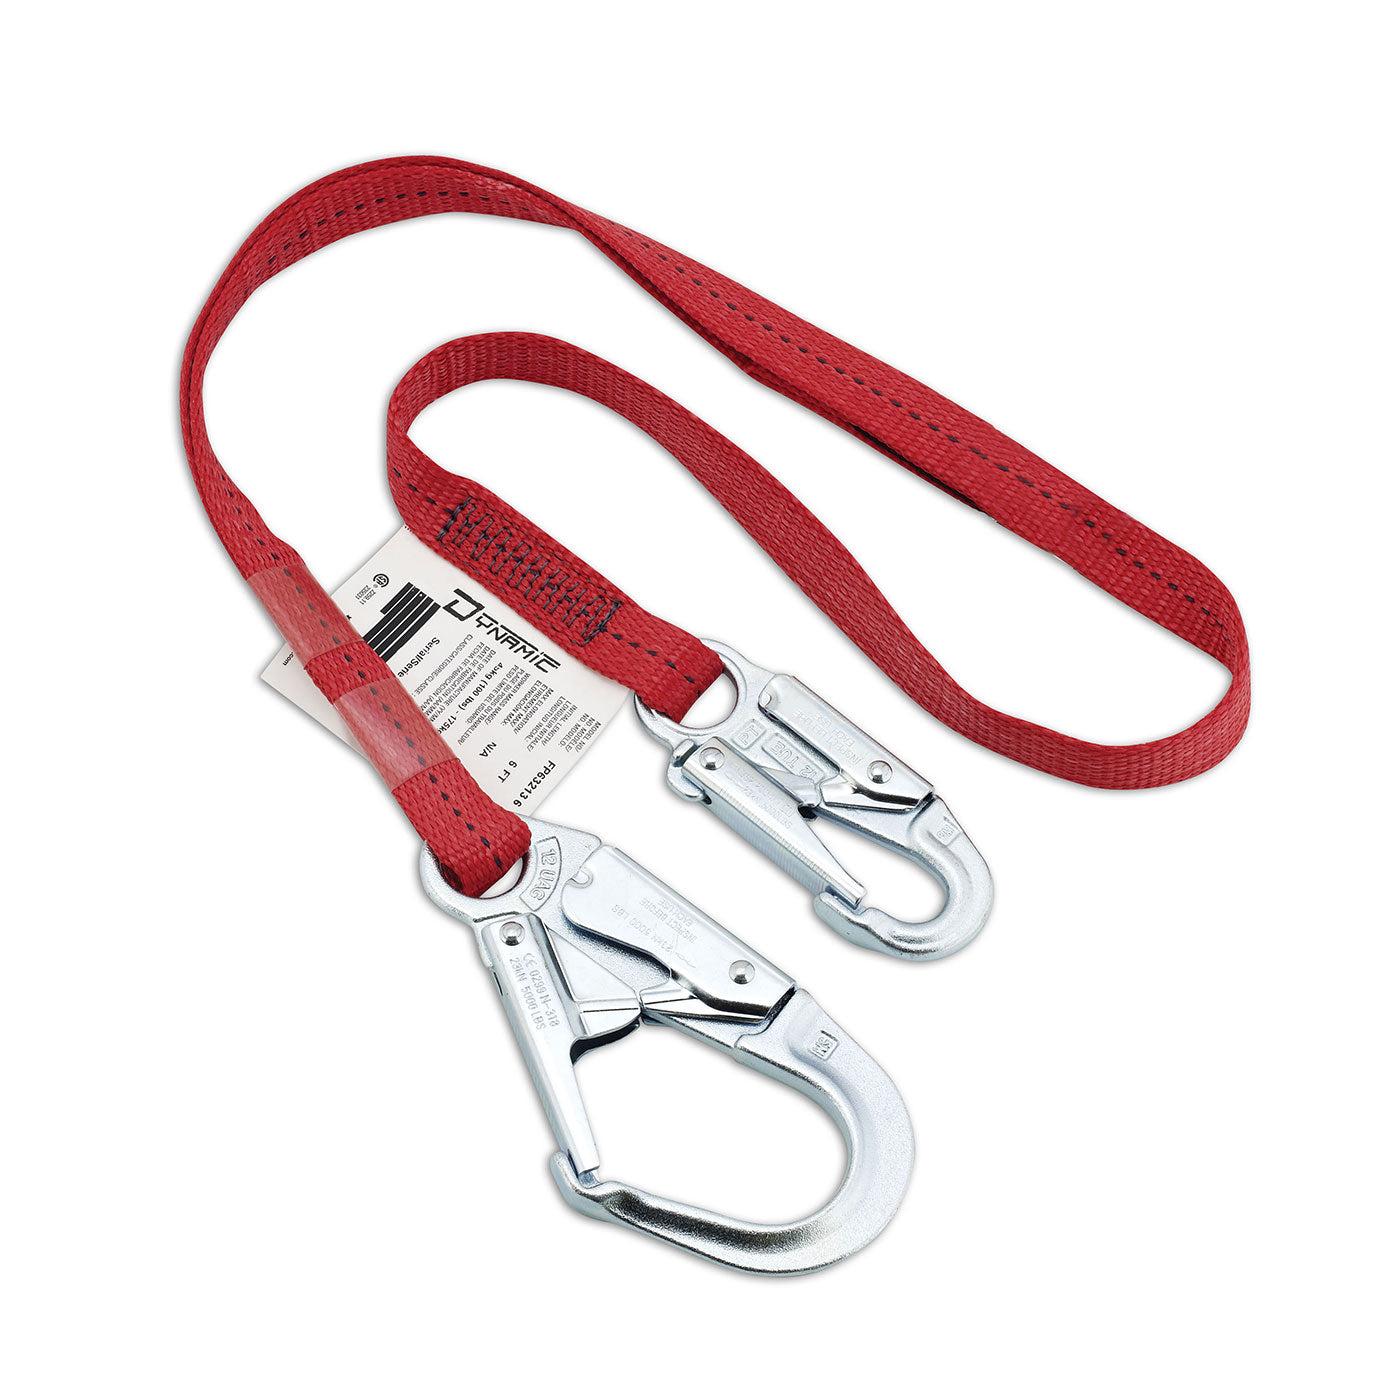 6ft Fixed Length Work Positioning Lanyard with Rebar Hook